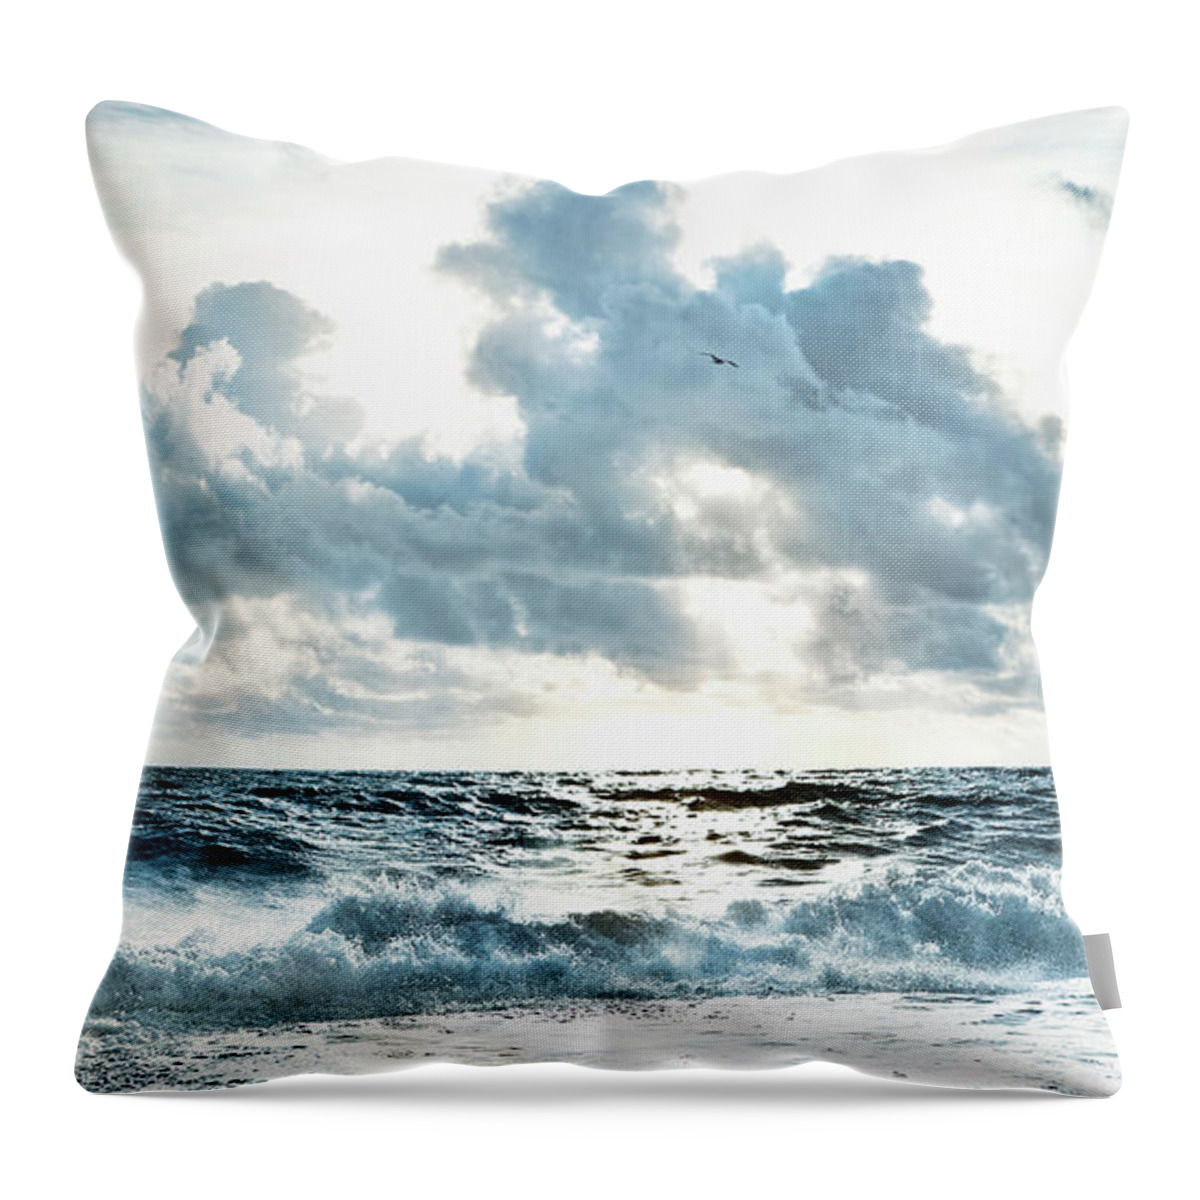 Tranquility Throw Pillow featuring the photograph Cloudy Sky Over Stormy Waves On Beach by Chris Clor